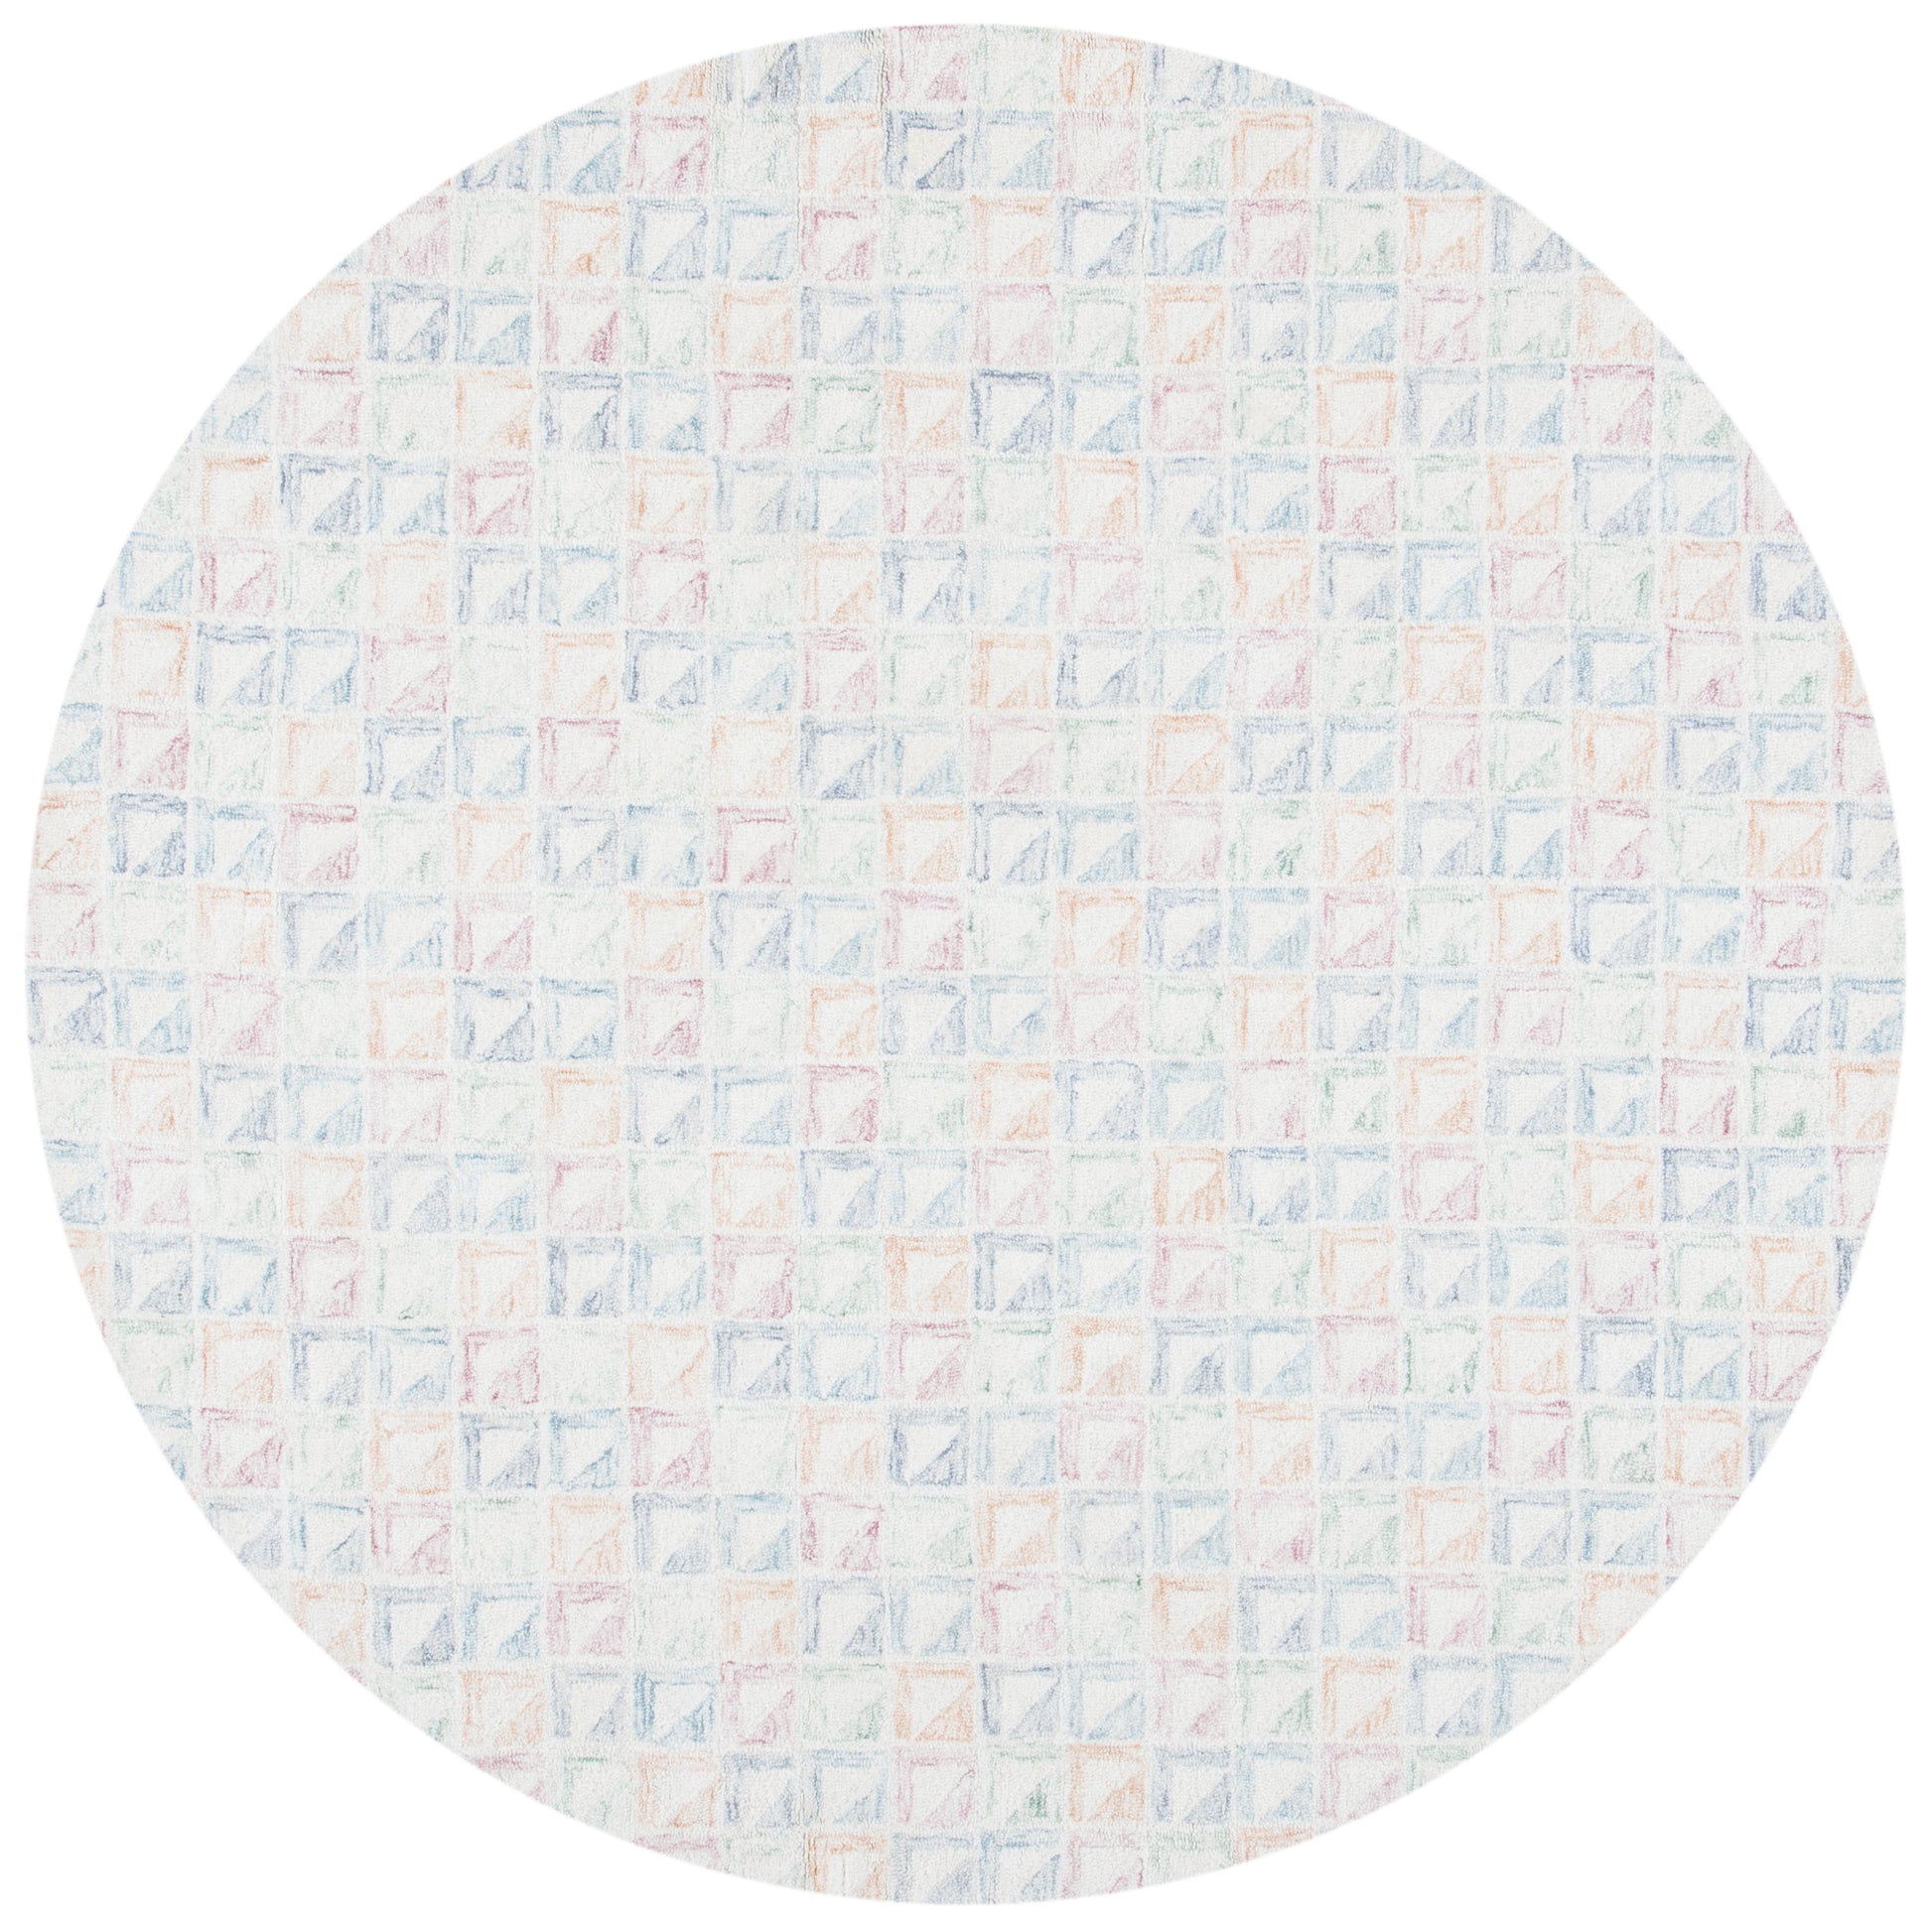 Safavieh Rodeo Drive Rd102M Ivory/Blue Area Rug